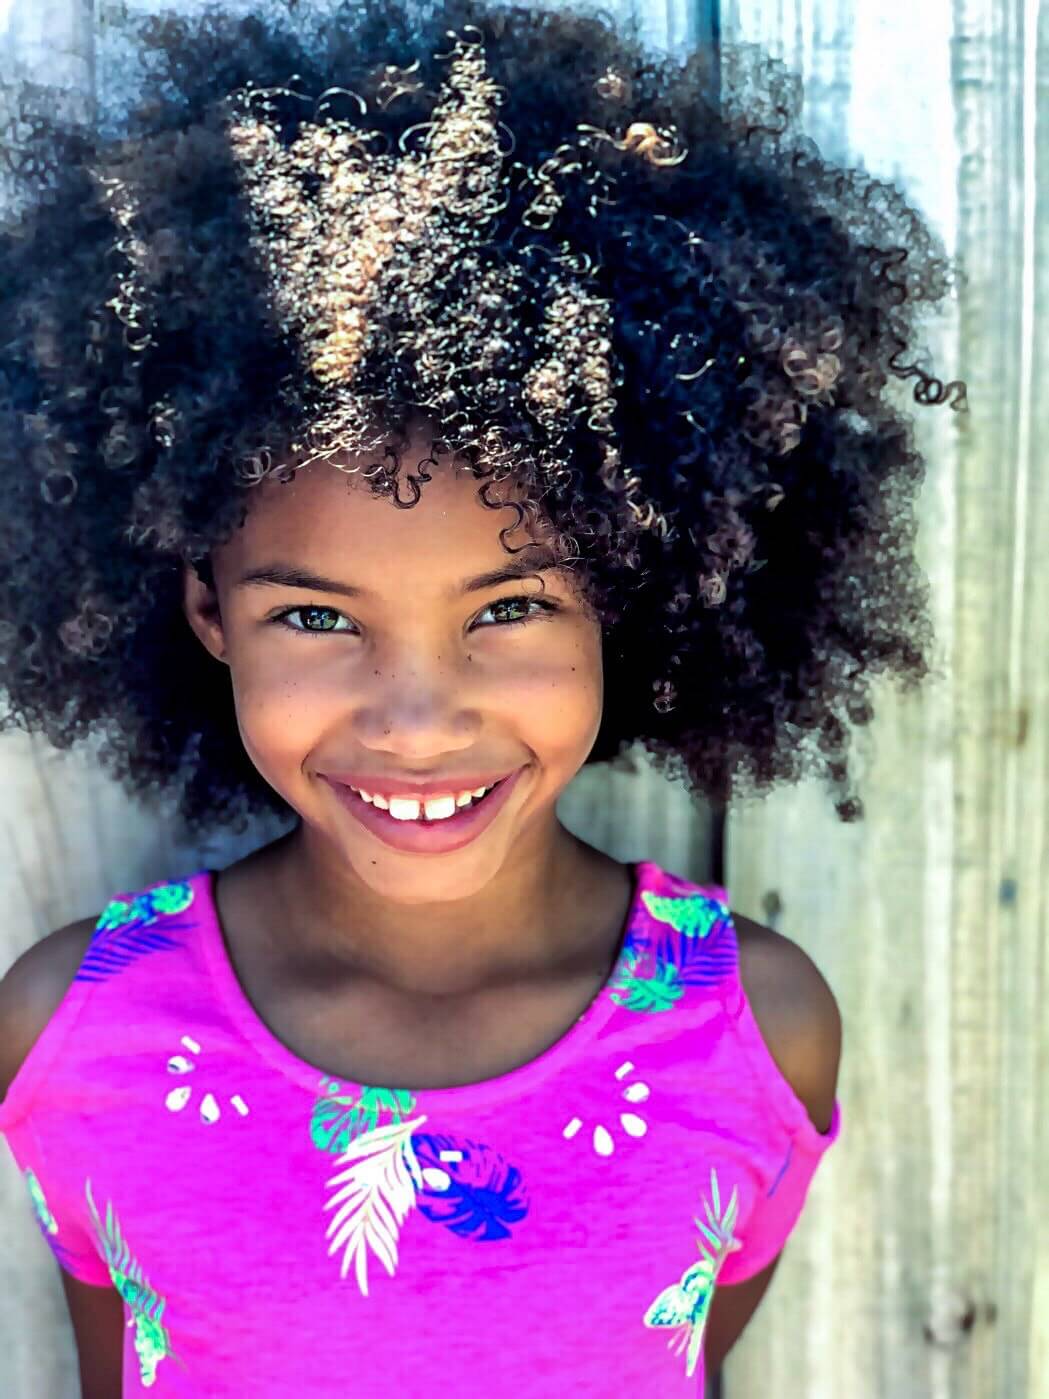 Smiling girl with curly hair